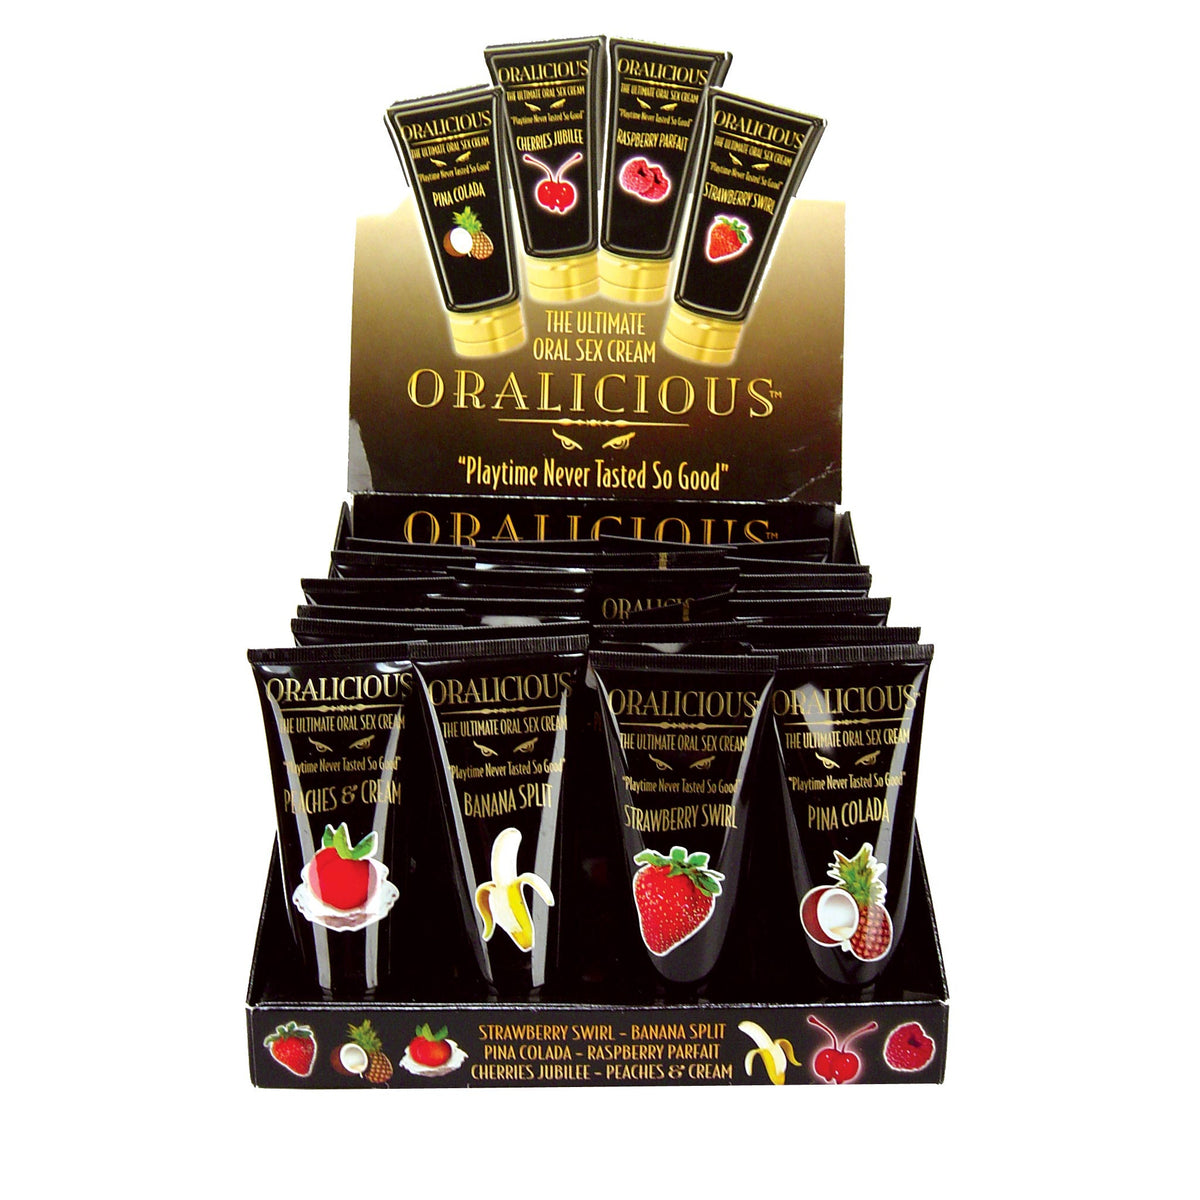 HottProducts Oralicious Oral Sex Cream - Display of 24